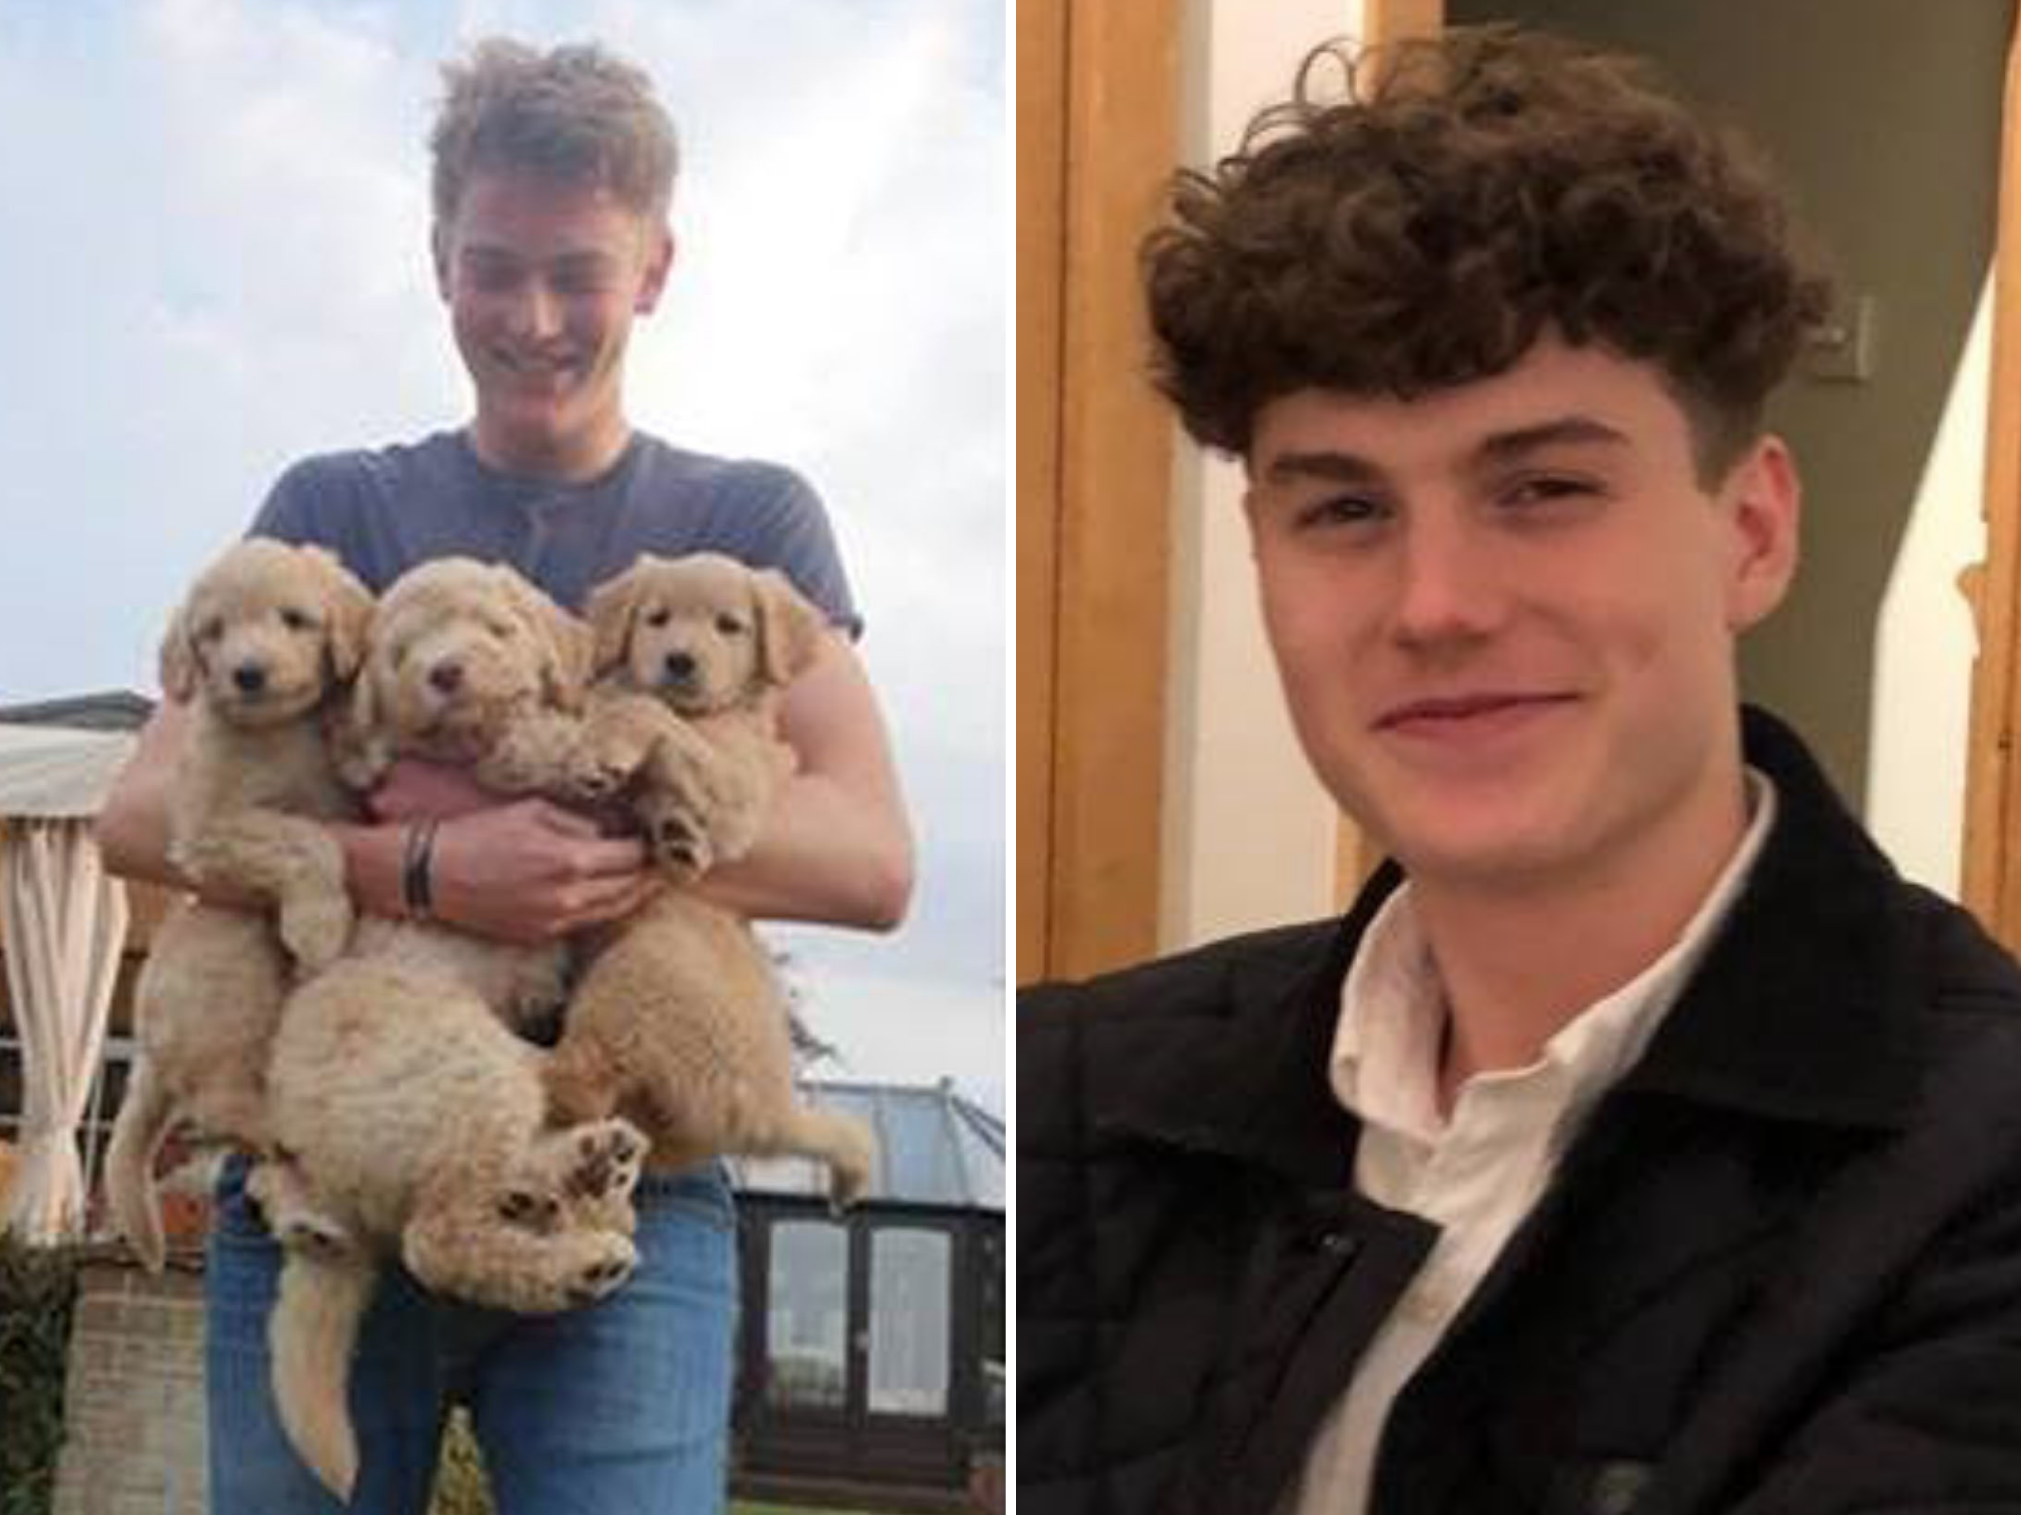 Friends Joe Atkins (left) and Freddie McLennan (right), both 19, died in a car accident on 9 June 2019 while travelling in Bolivia.